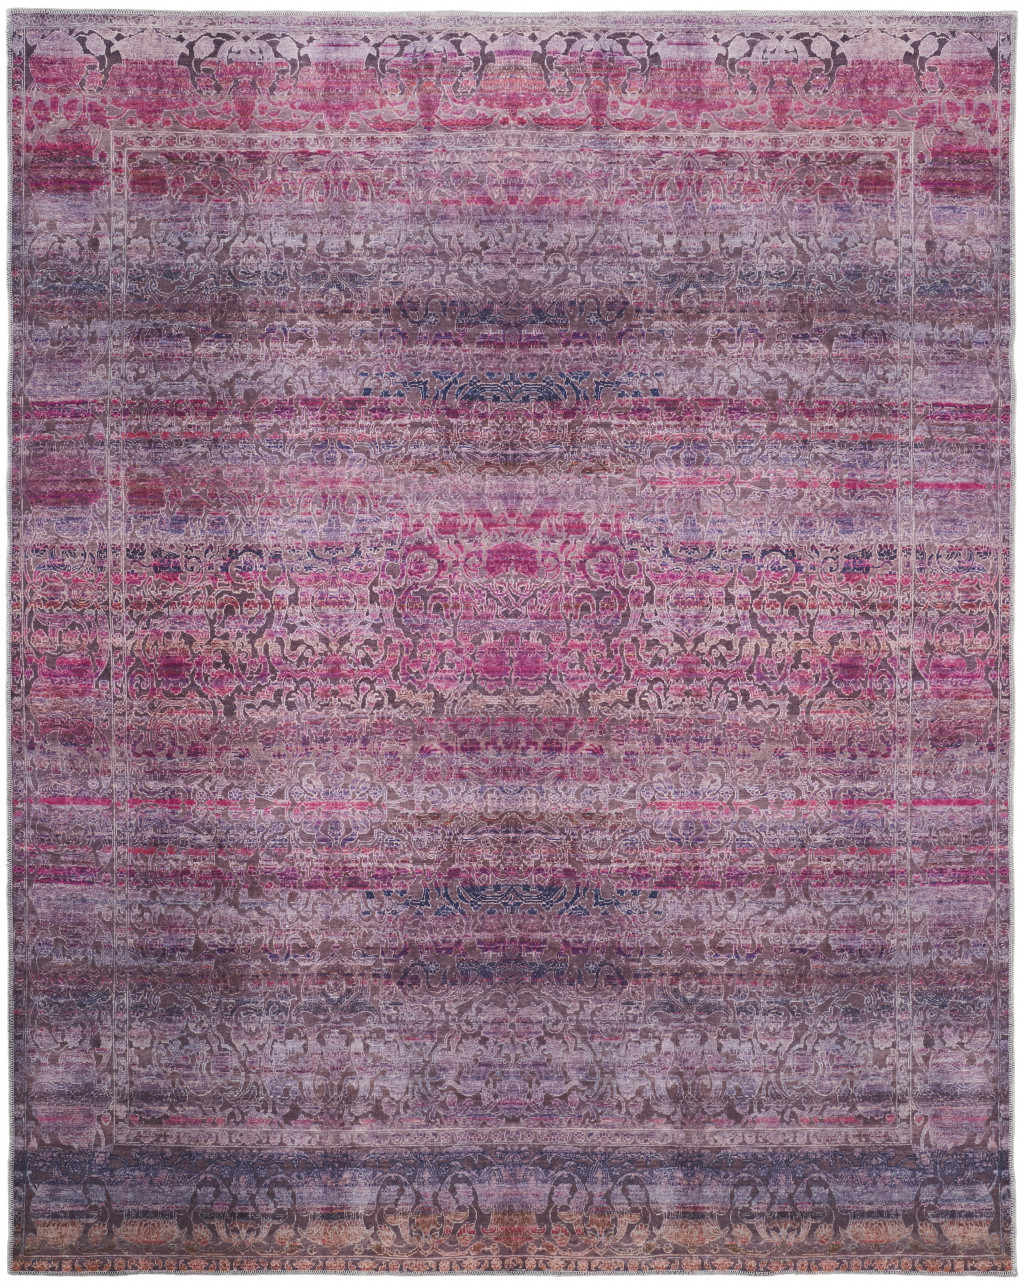 8' X 10' Pink And Purple Floral Power Loom Area Rug-515191-1